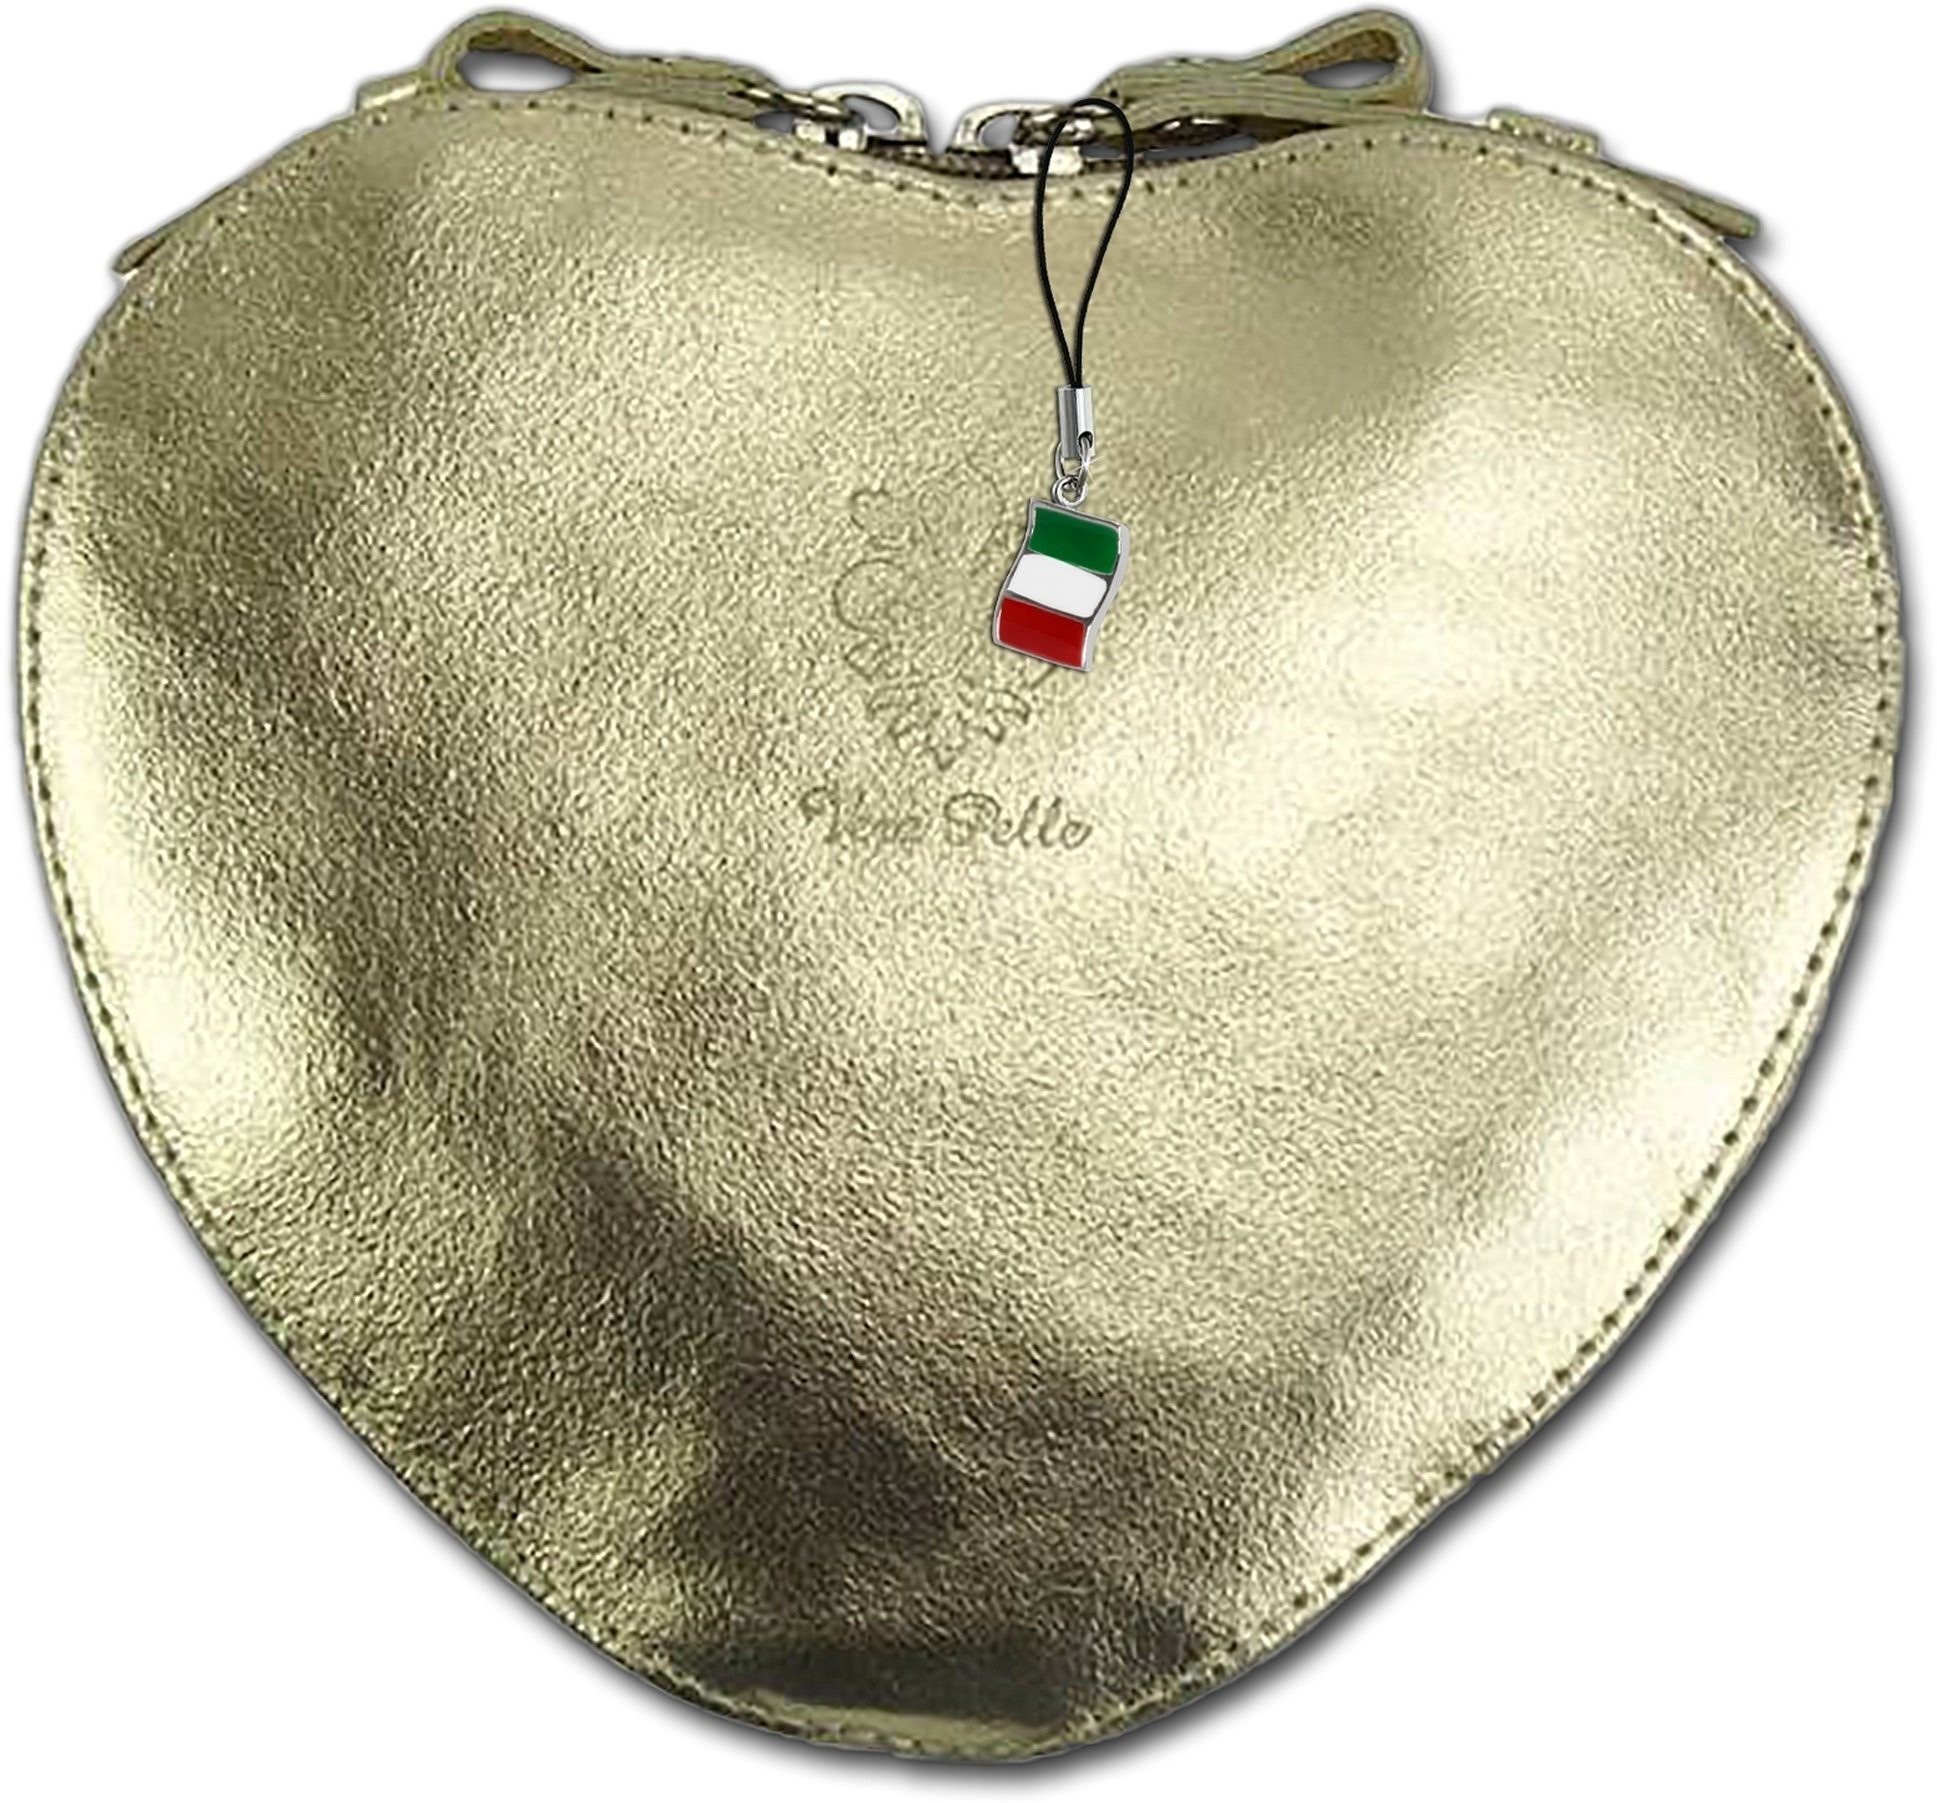 FLORENCE Clutch Florence Heart Bag Damen Handtasche (Clutch, Clutch), Damen  Tasche Echtleder gold, Herz, Made-In Italy